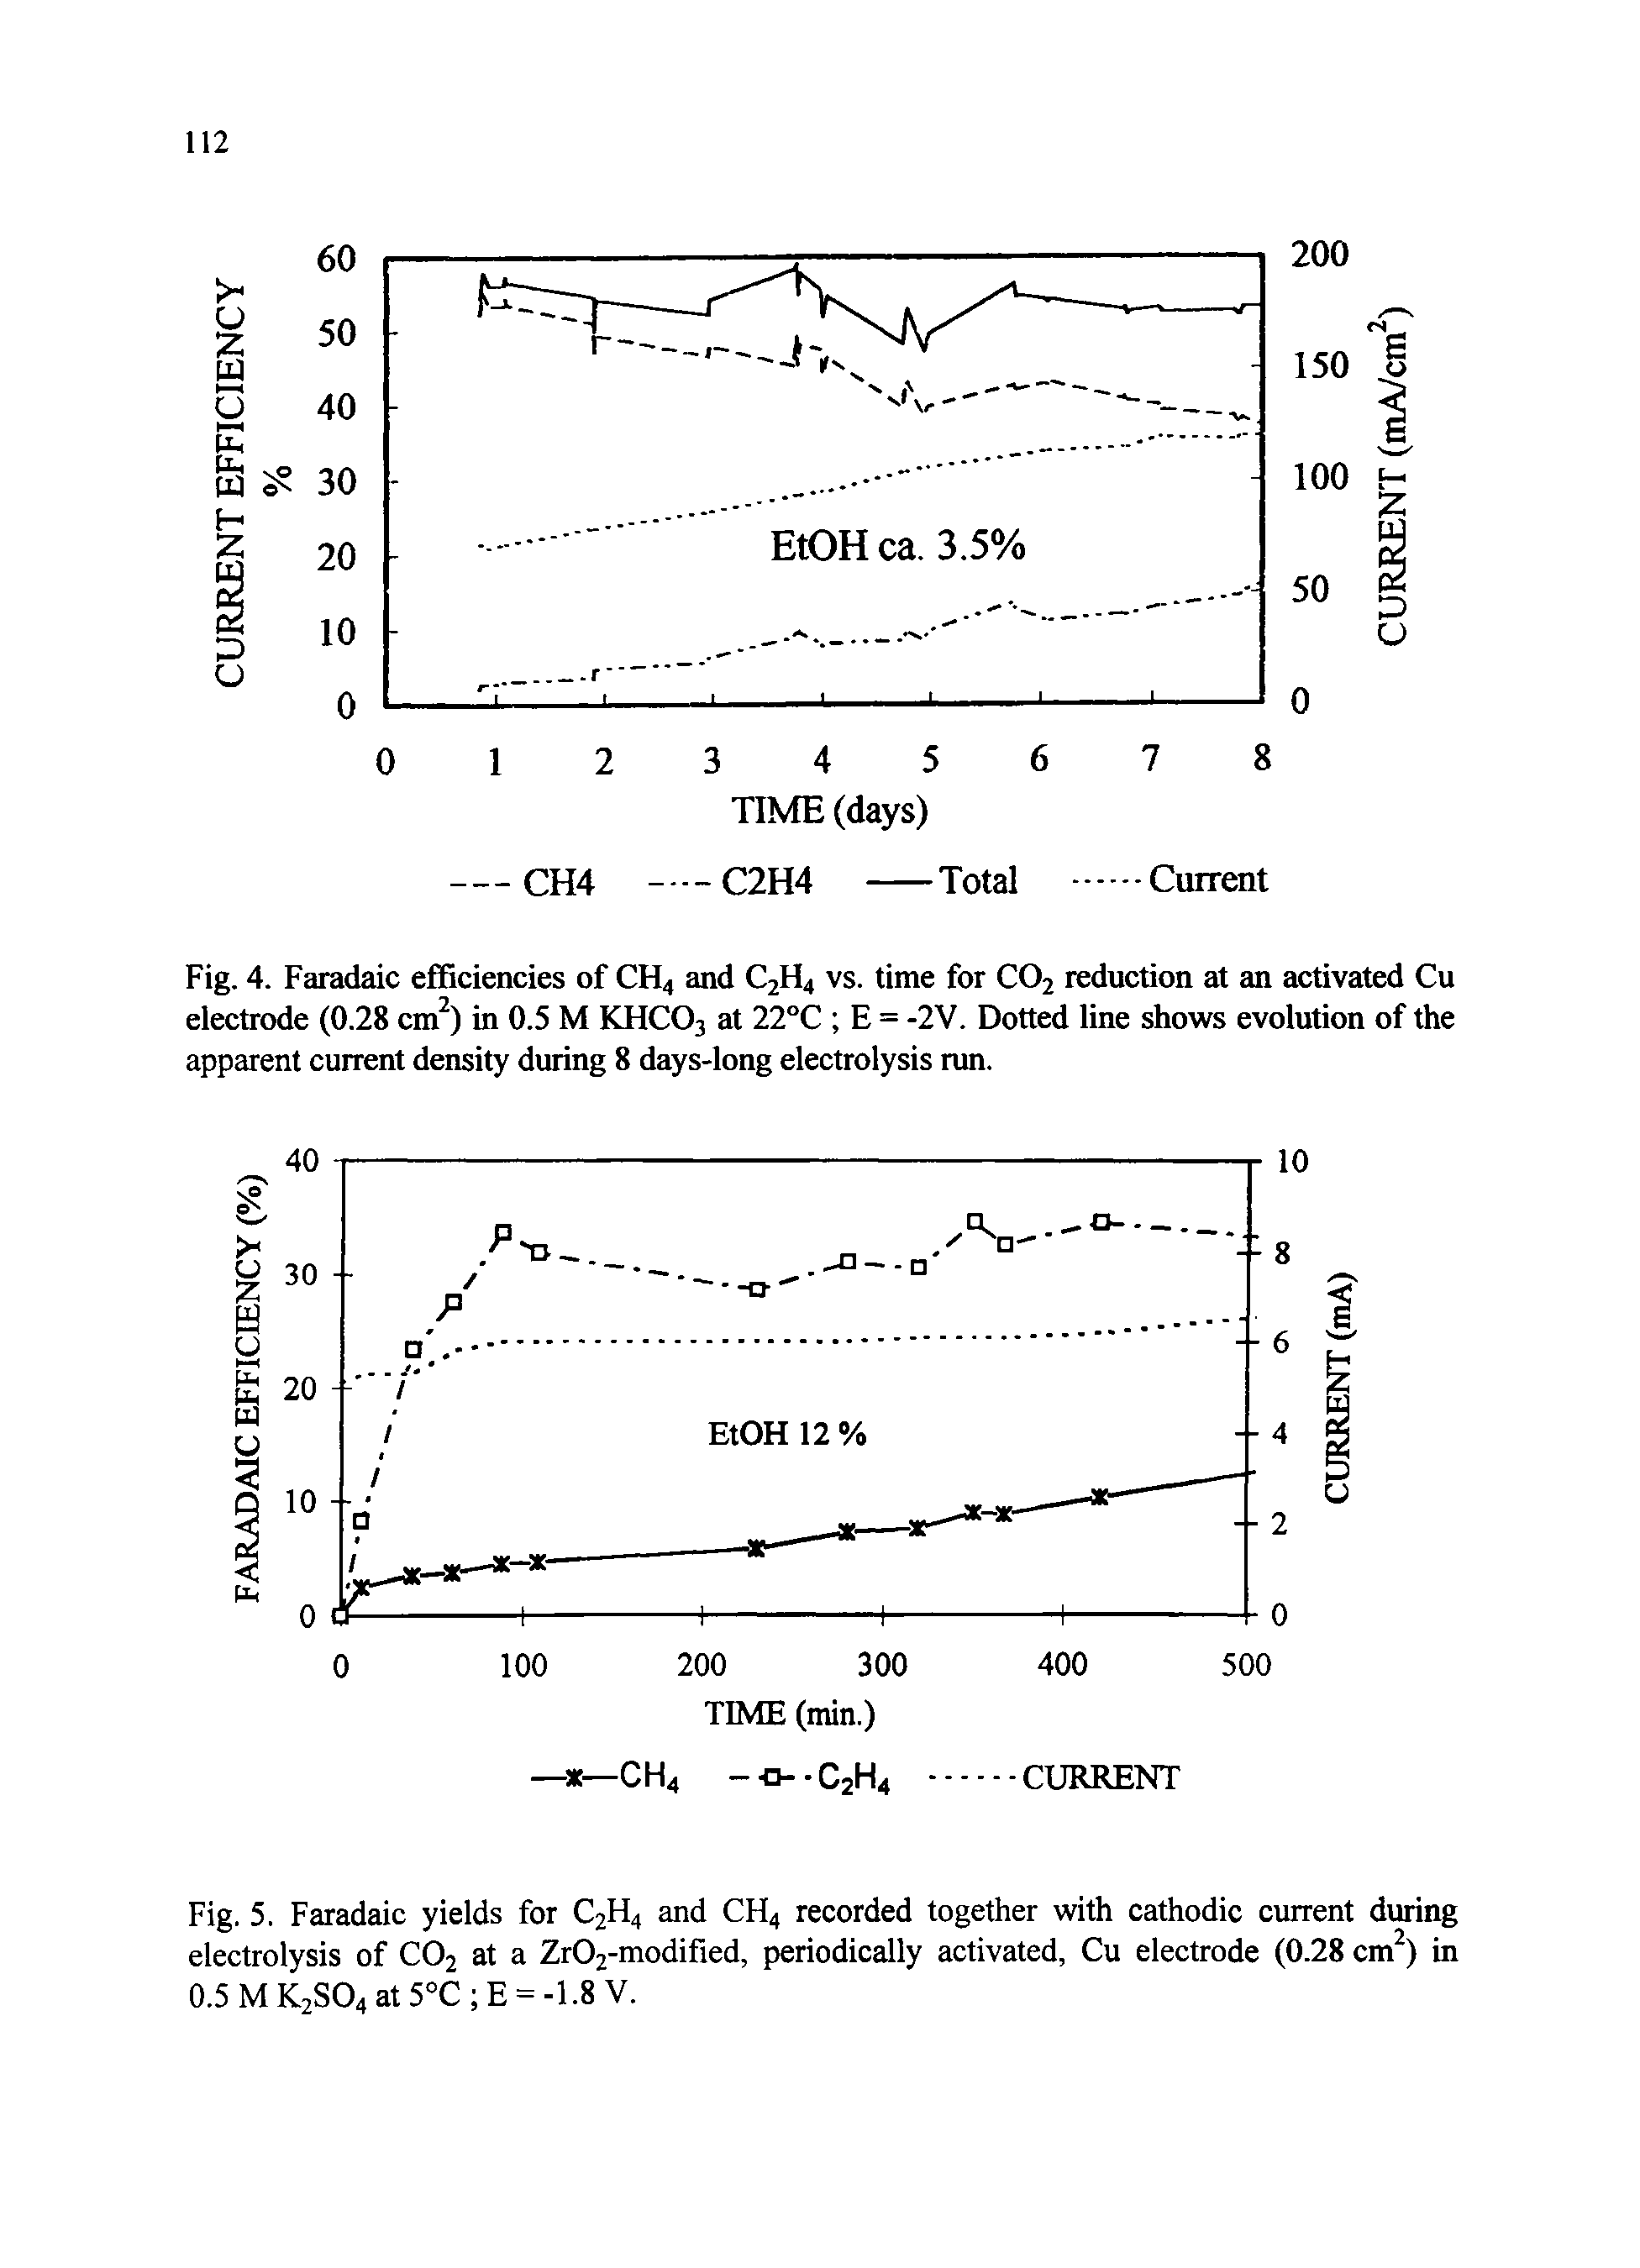 Fig. 4. Faradaic efficiencies of CH4 and C2H4 vs. time for CO2 reduction at an activated Cu electrode (0.28 cm ) in 0.5 M KHCO3 at 22°C E = -2V. Dotted line shows evolution of the apparent current density during 8 days-long electrolysis nm.